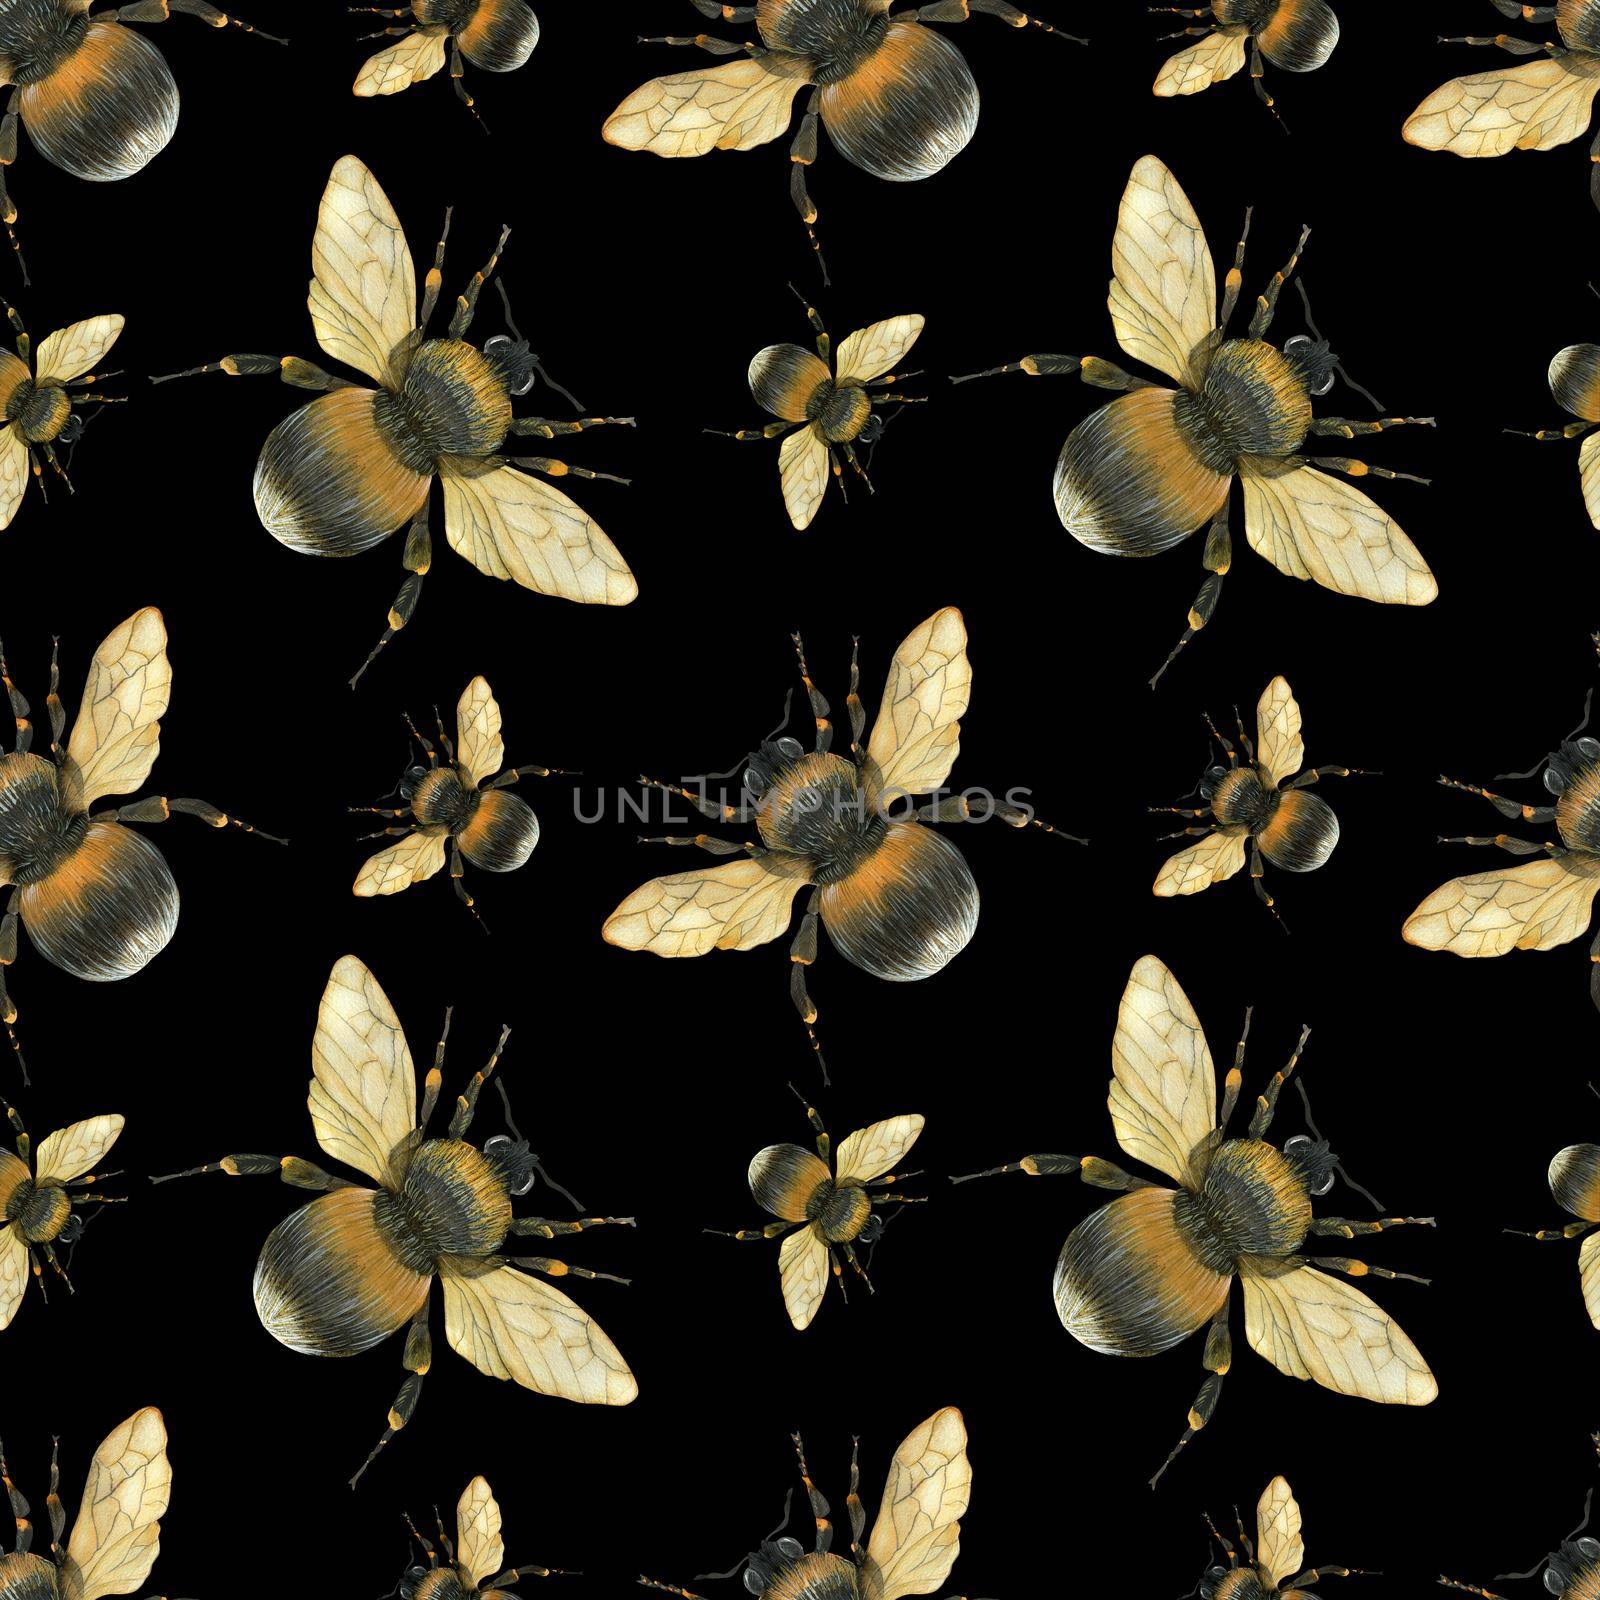 Watercolor seamless pattern Fat Fluffy Bumblebees. Realistic style, insects on a black background, path included